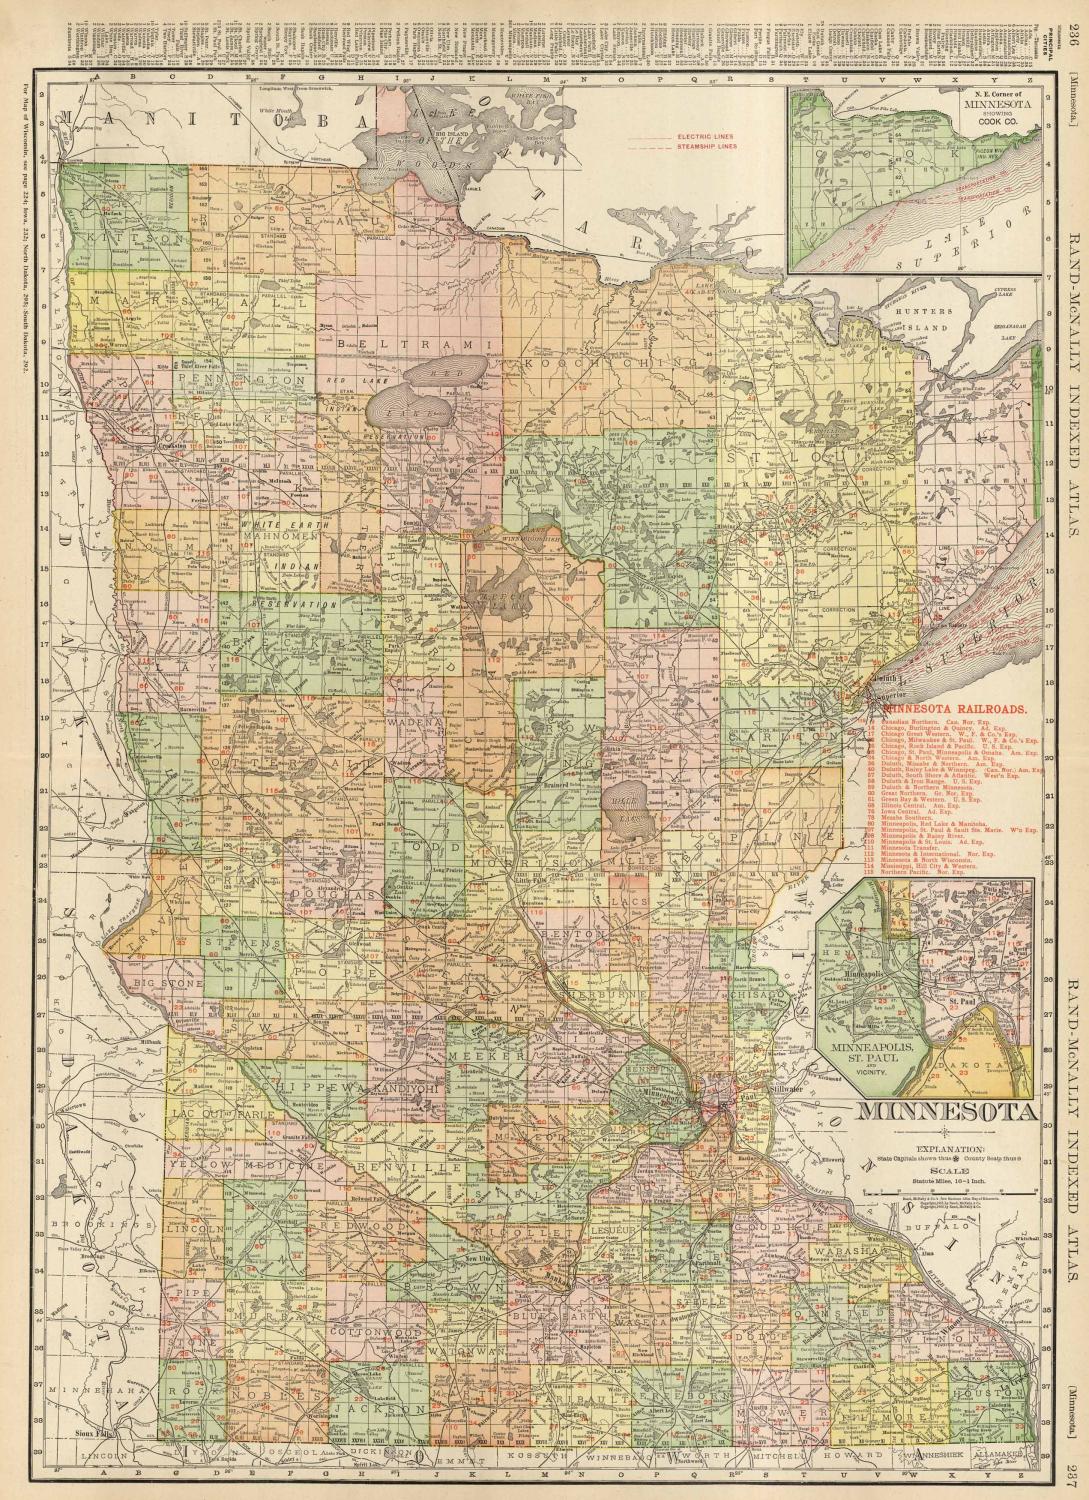 Official Map of Minneapolis and Saint Paul, Minnesota, 1923